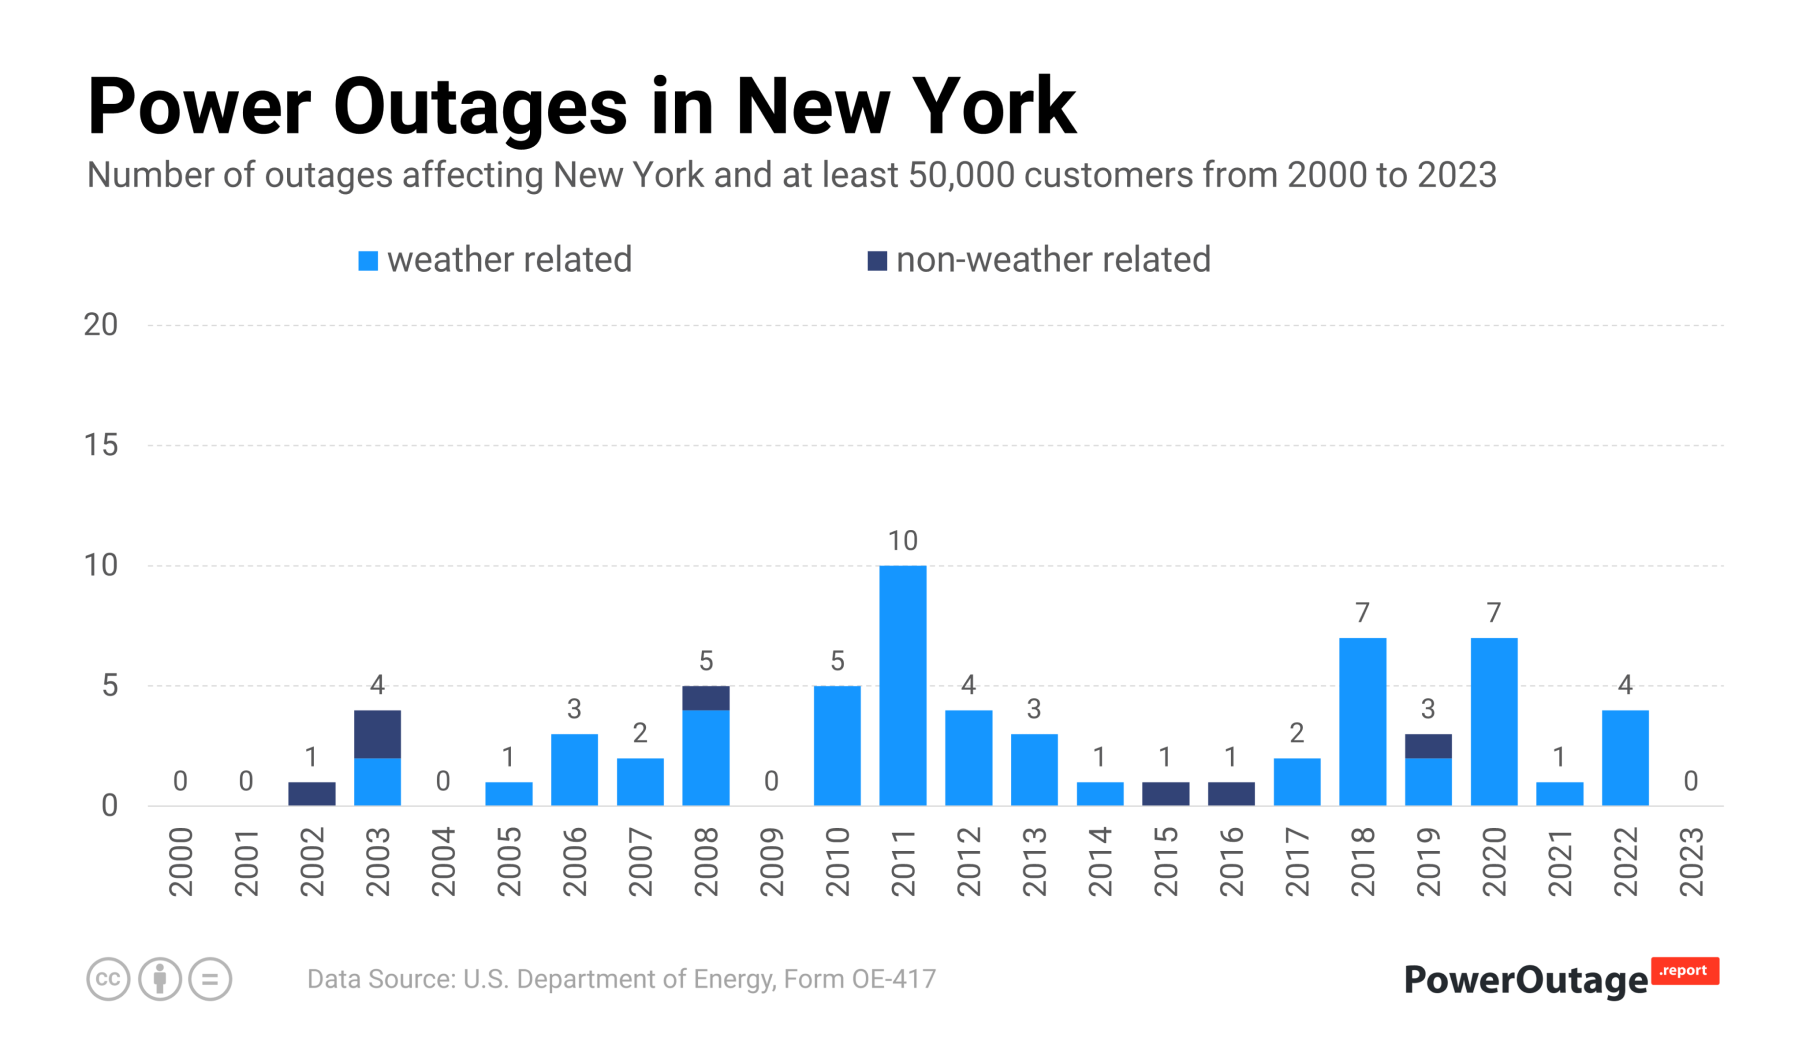 New York Power Outage Statistics (2000 - 2022)